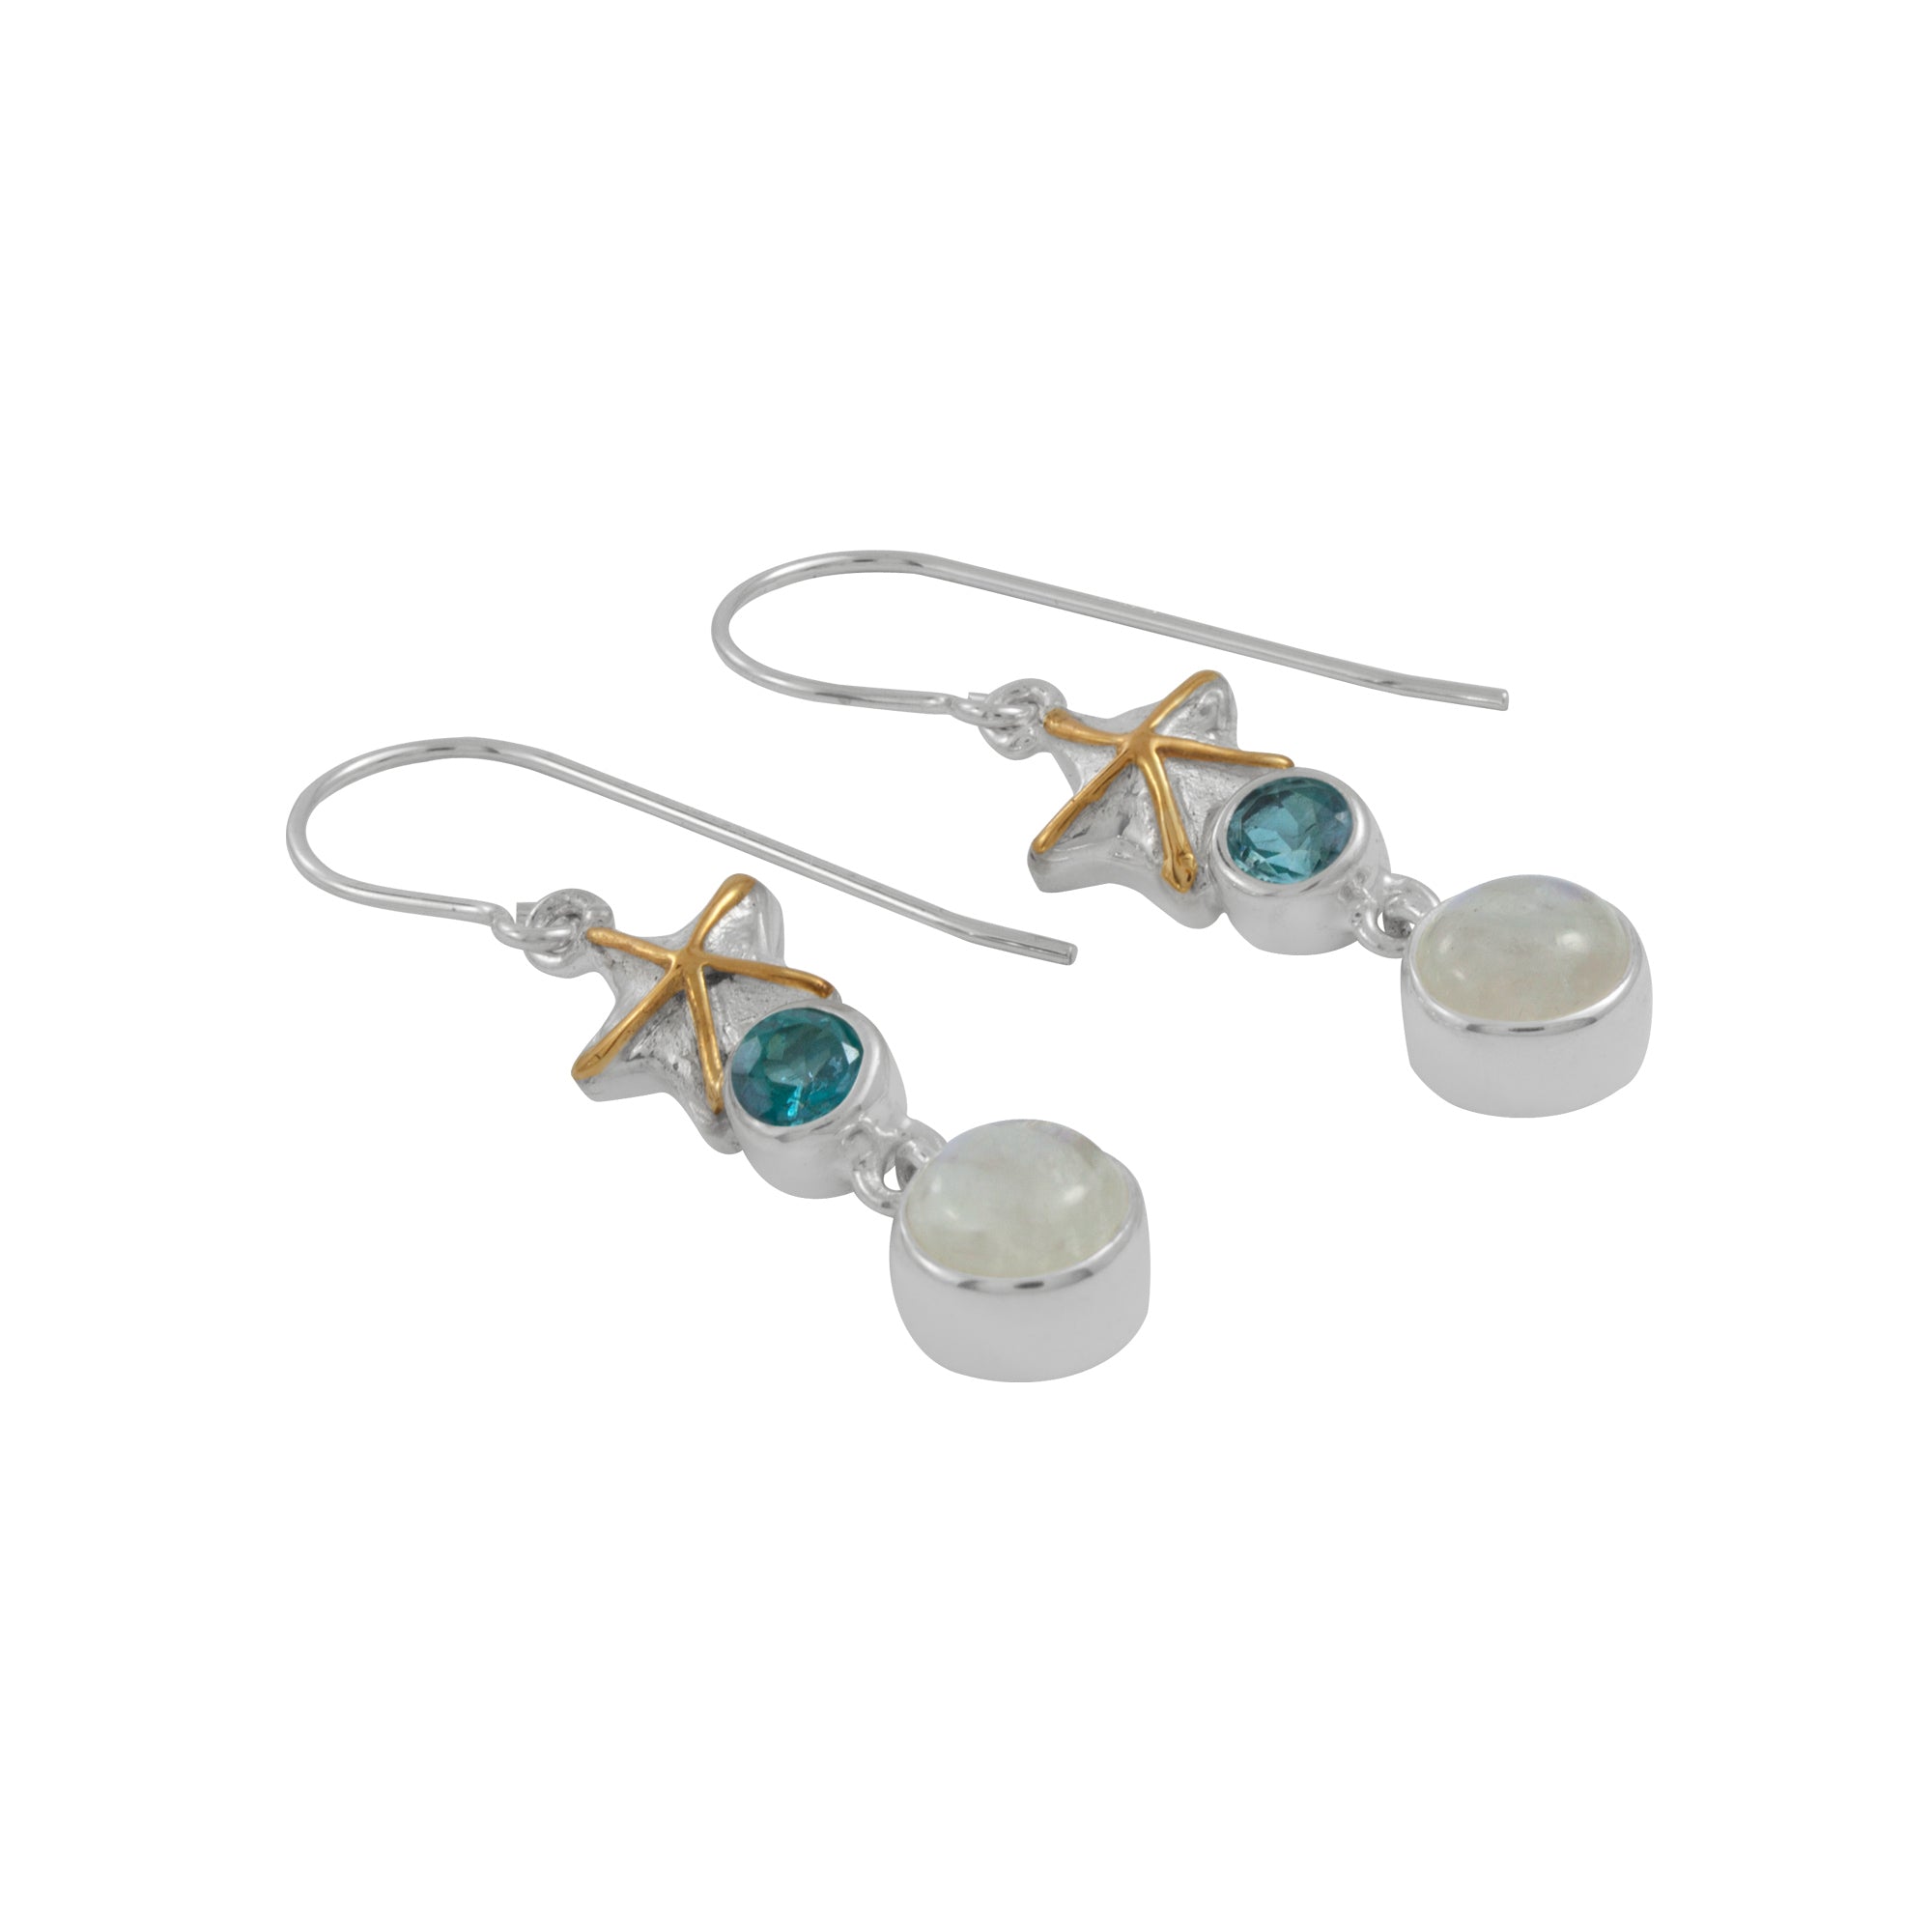 Silver Earring With Star Component, Green Topaz Round Facet And RainBow Moon Round Cab